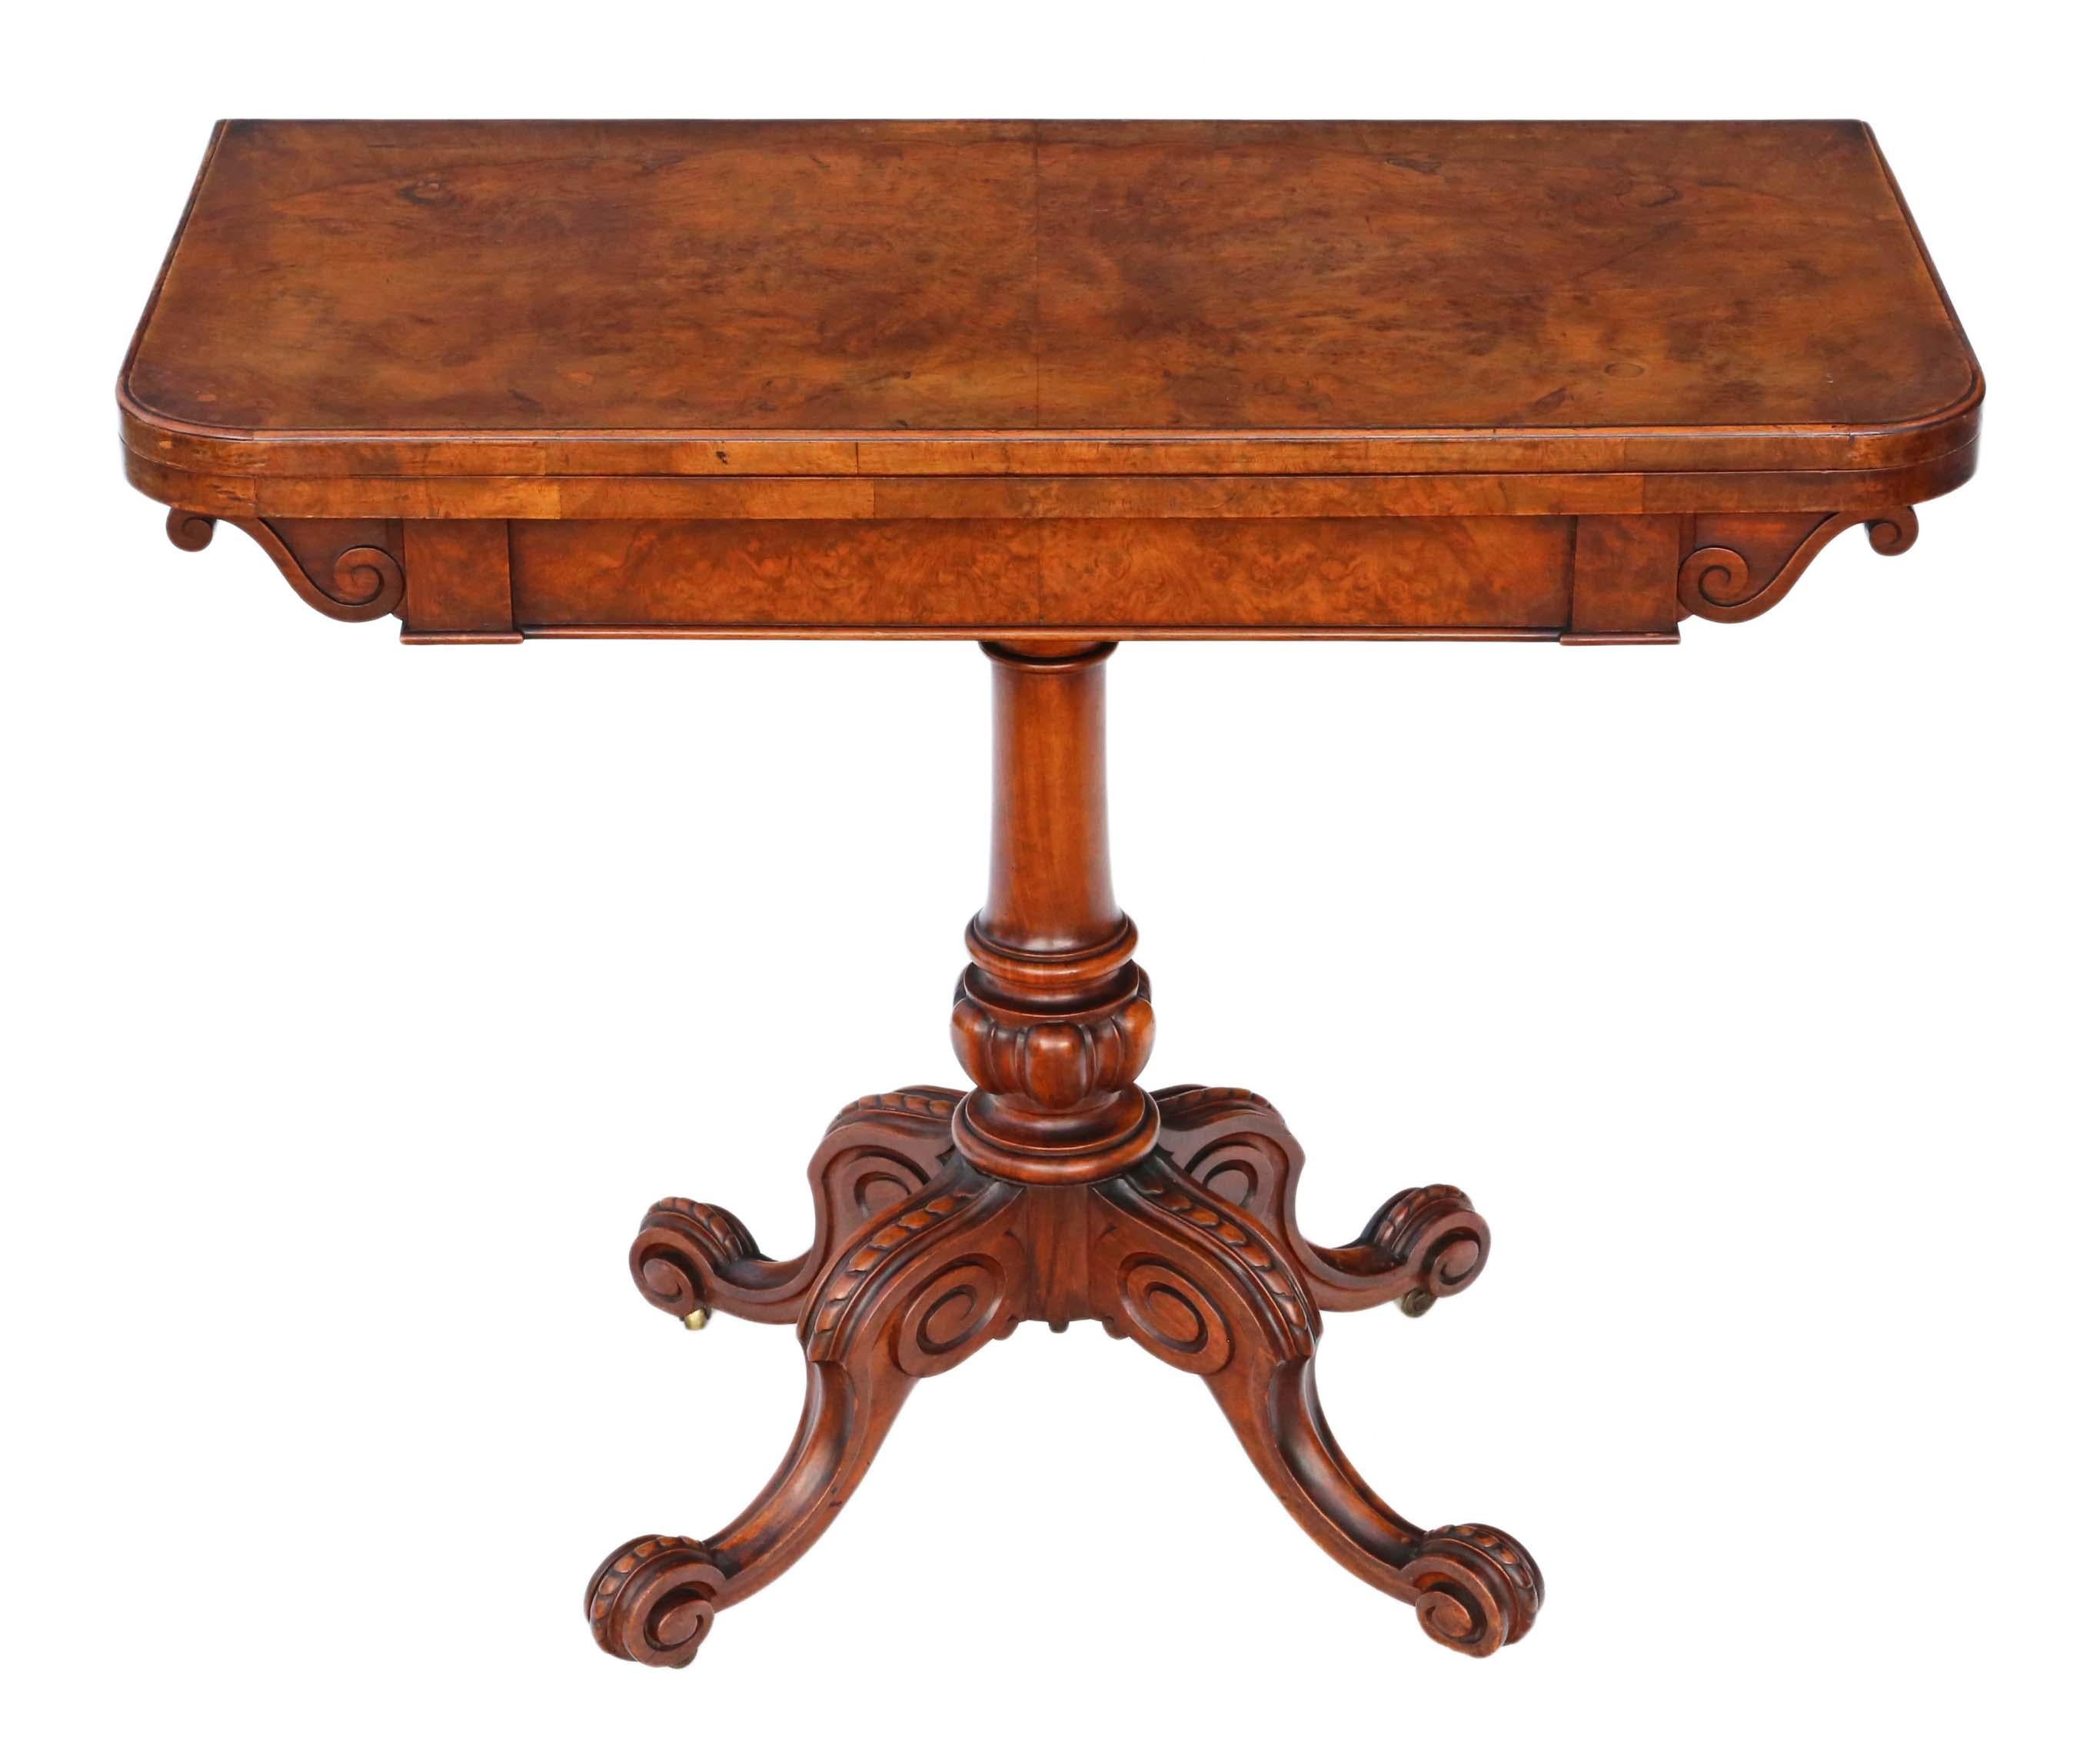 Antique quality Victorian circa 1860 burr walnut folding card or tea table.
Solid and strong, with no loose joints. Full of age, character and charm. Attractive pedestal base with period brass castors.
Would look great in the right location! No